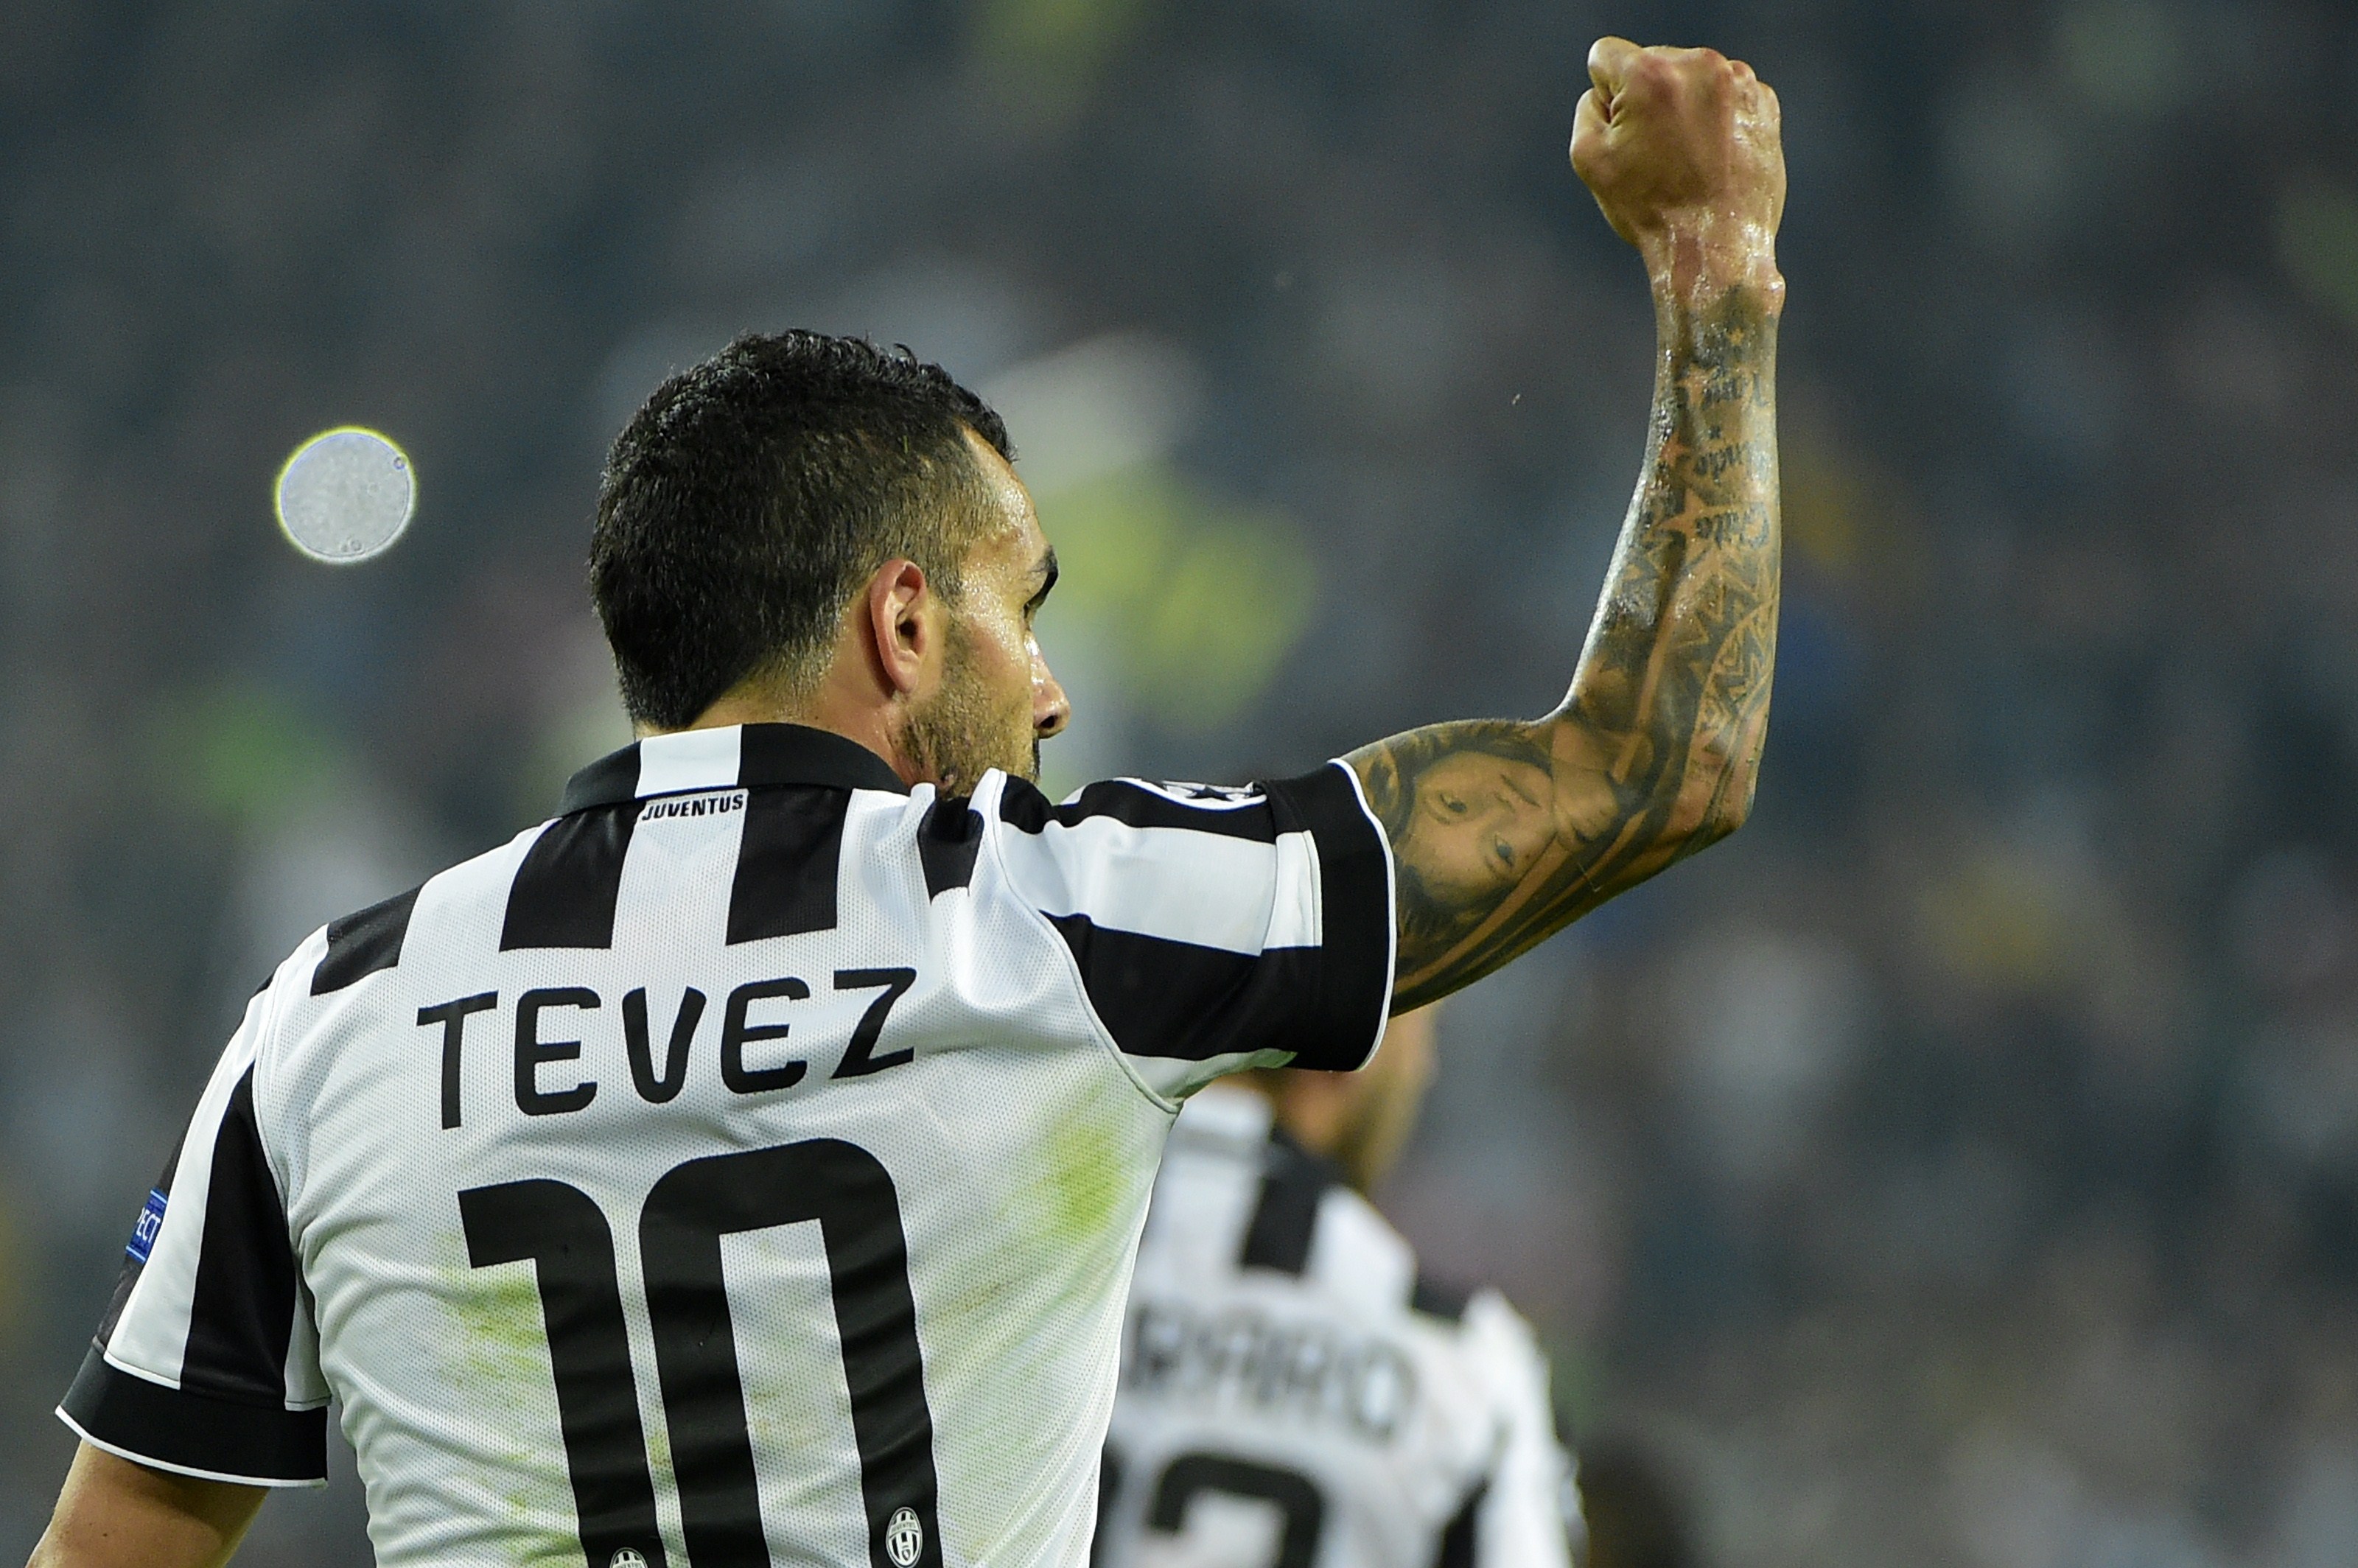  Video – On this day, Carlos Tevez reigned supreme away to Dortmund